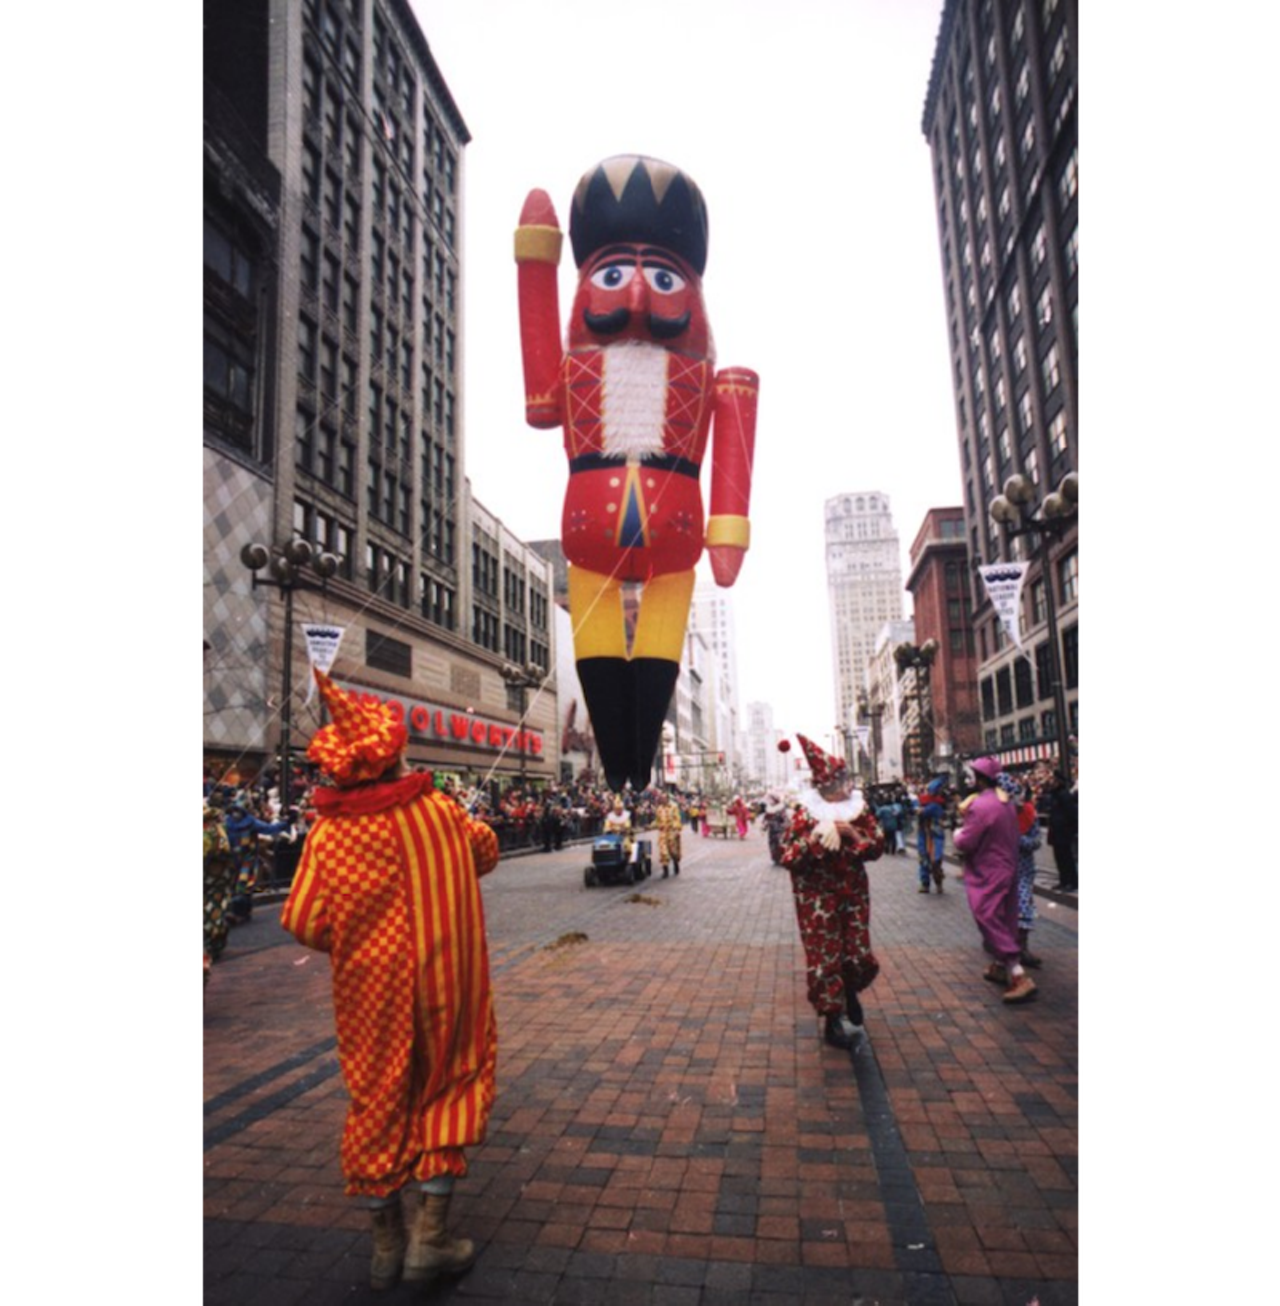 Thanksgiving Day Parade in Detroit. (1981)
Clowns hold tethers for a giant nutcracker balloon in Detroit's Thanksgiving Day Parade.
All photos courtesy of Walter P. Reuther Library, Archives of Labor and Urban Affairs, Wayne State University